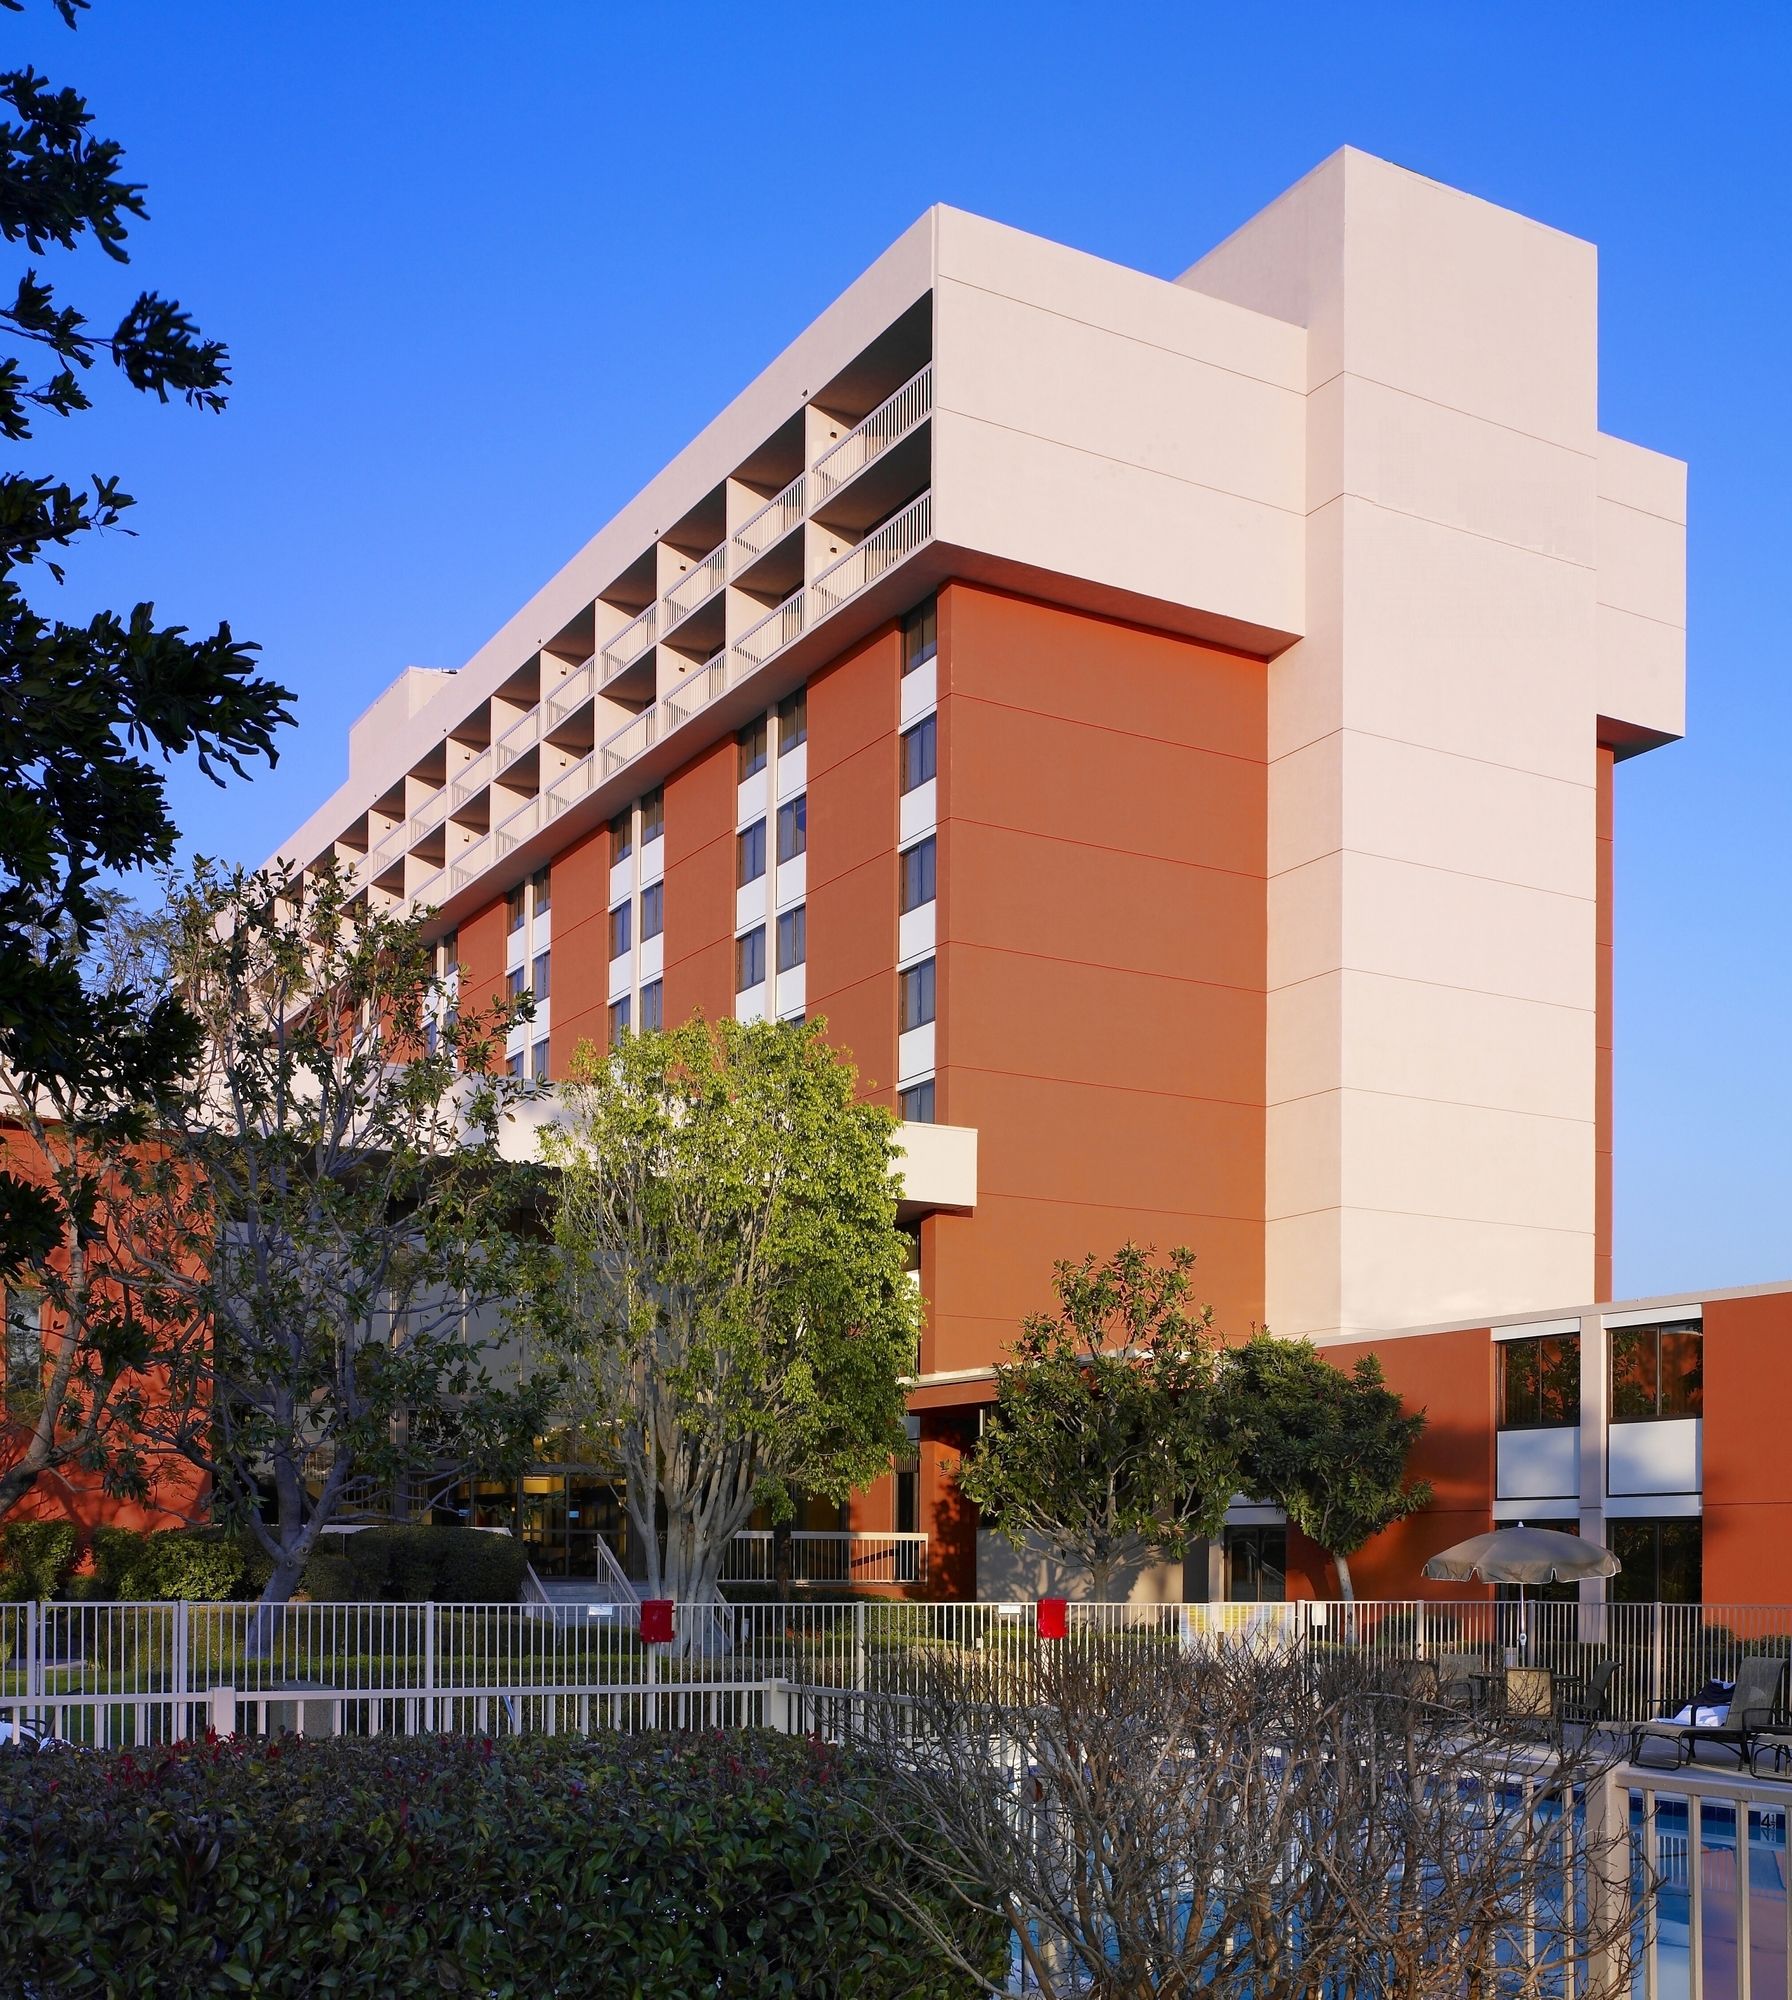 Ontario Airport Hotel & Conference Center